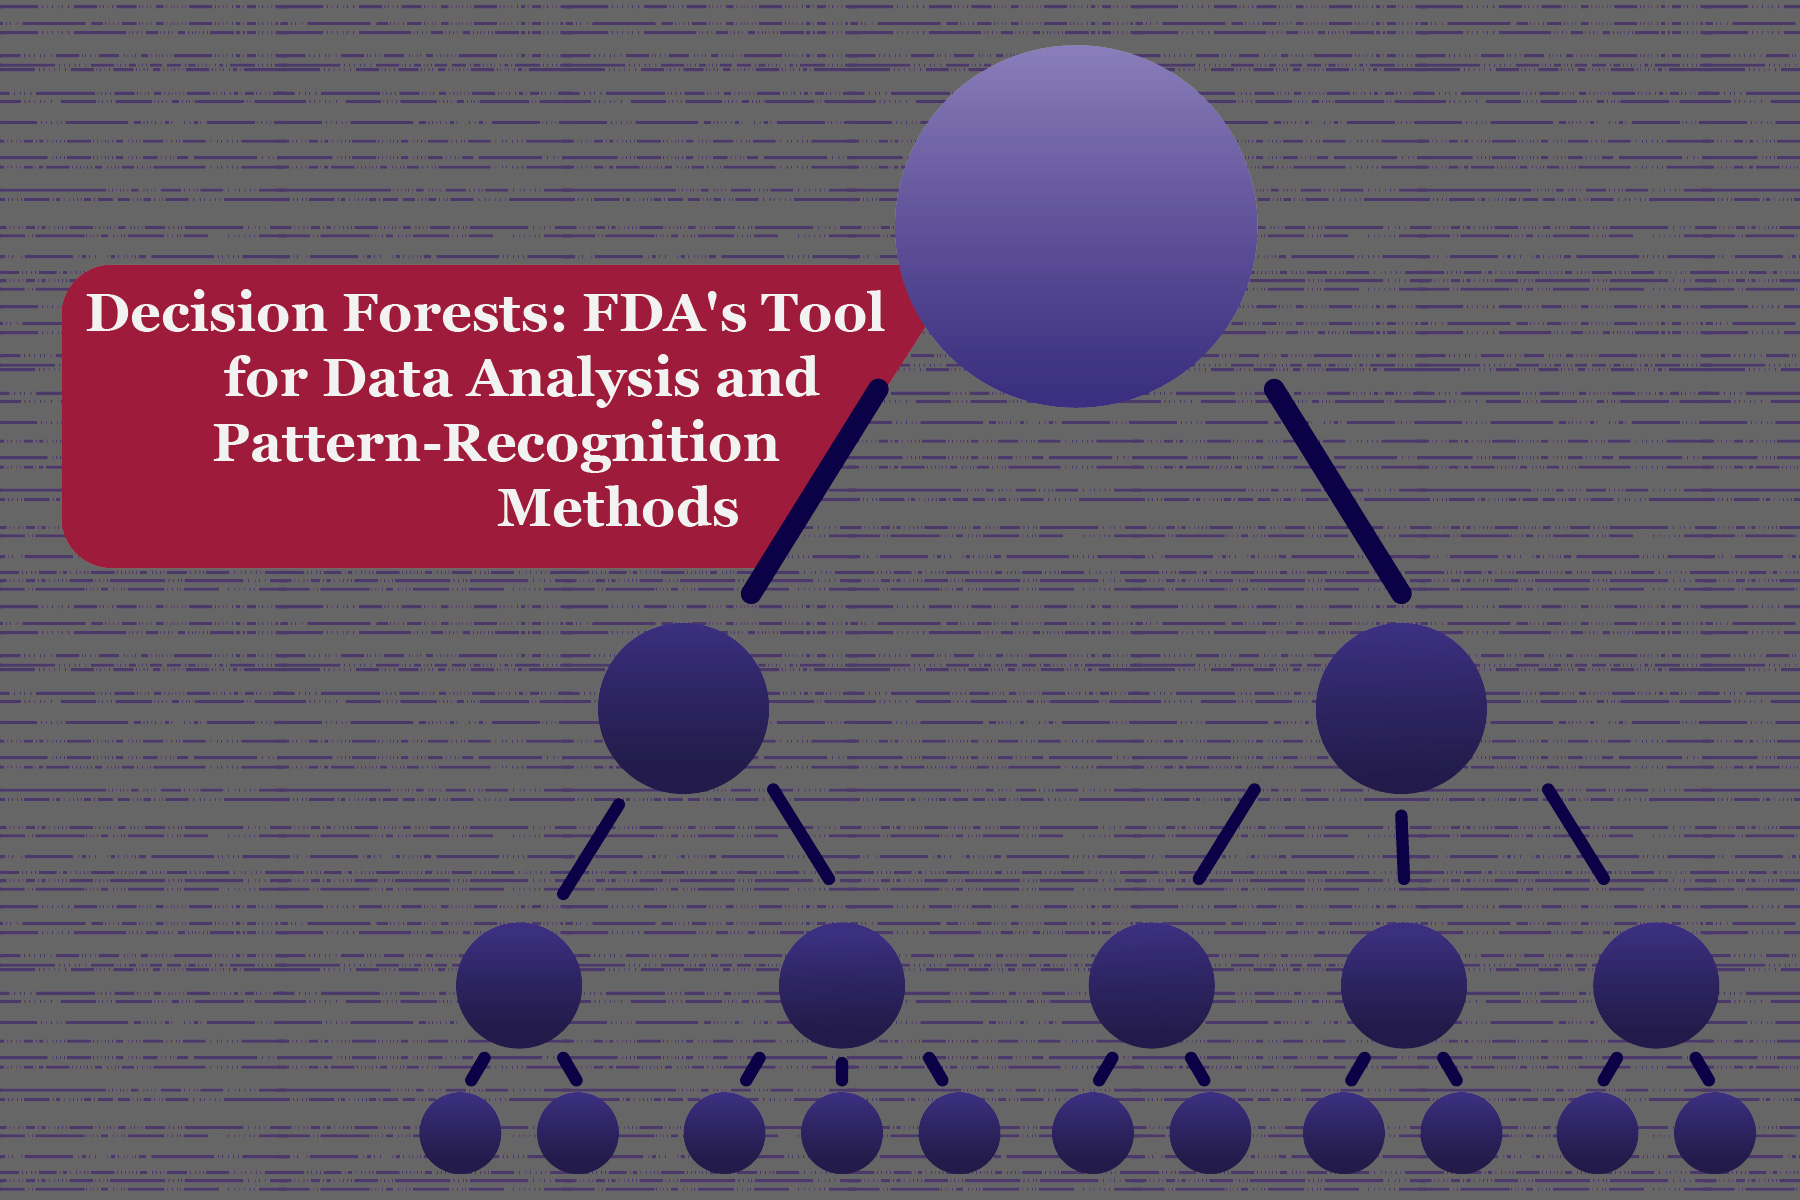 Decision Forests: FDA’s Tool for Data Analysis and Pattern-Recognition Methods